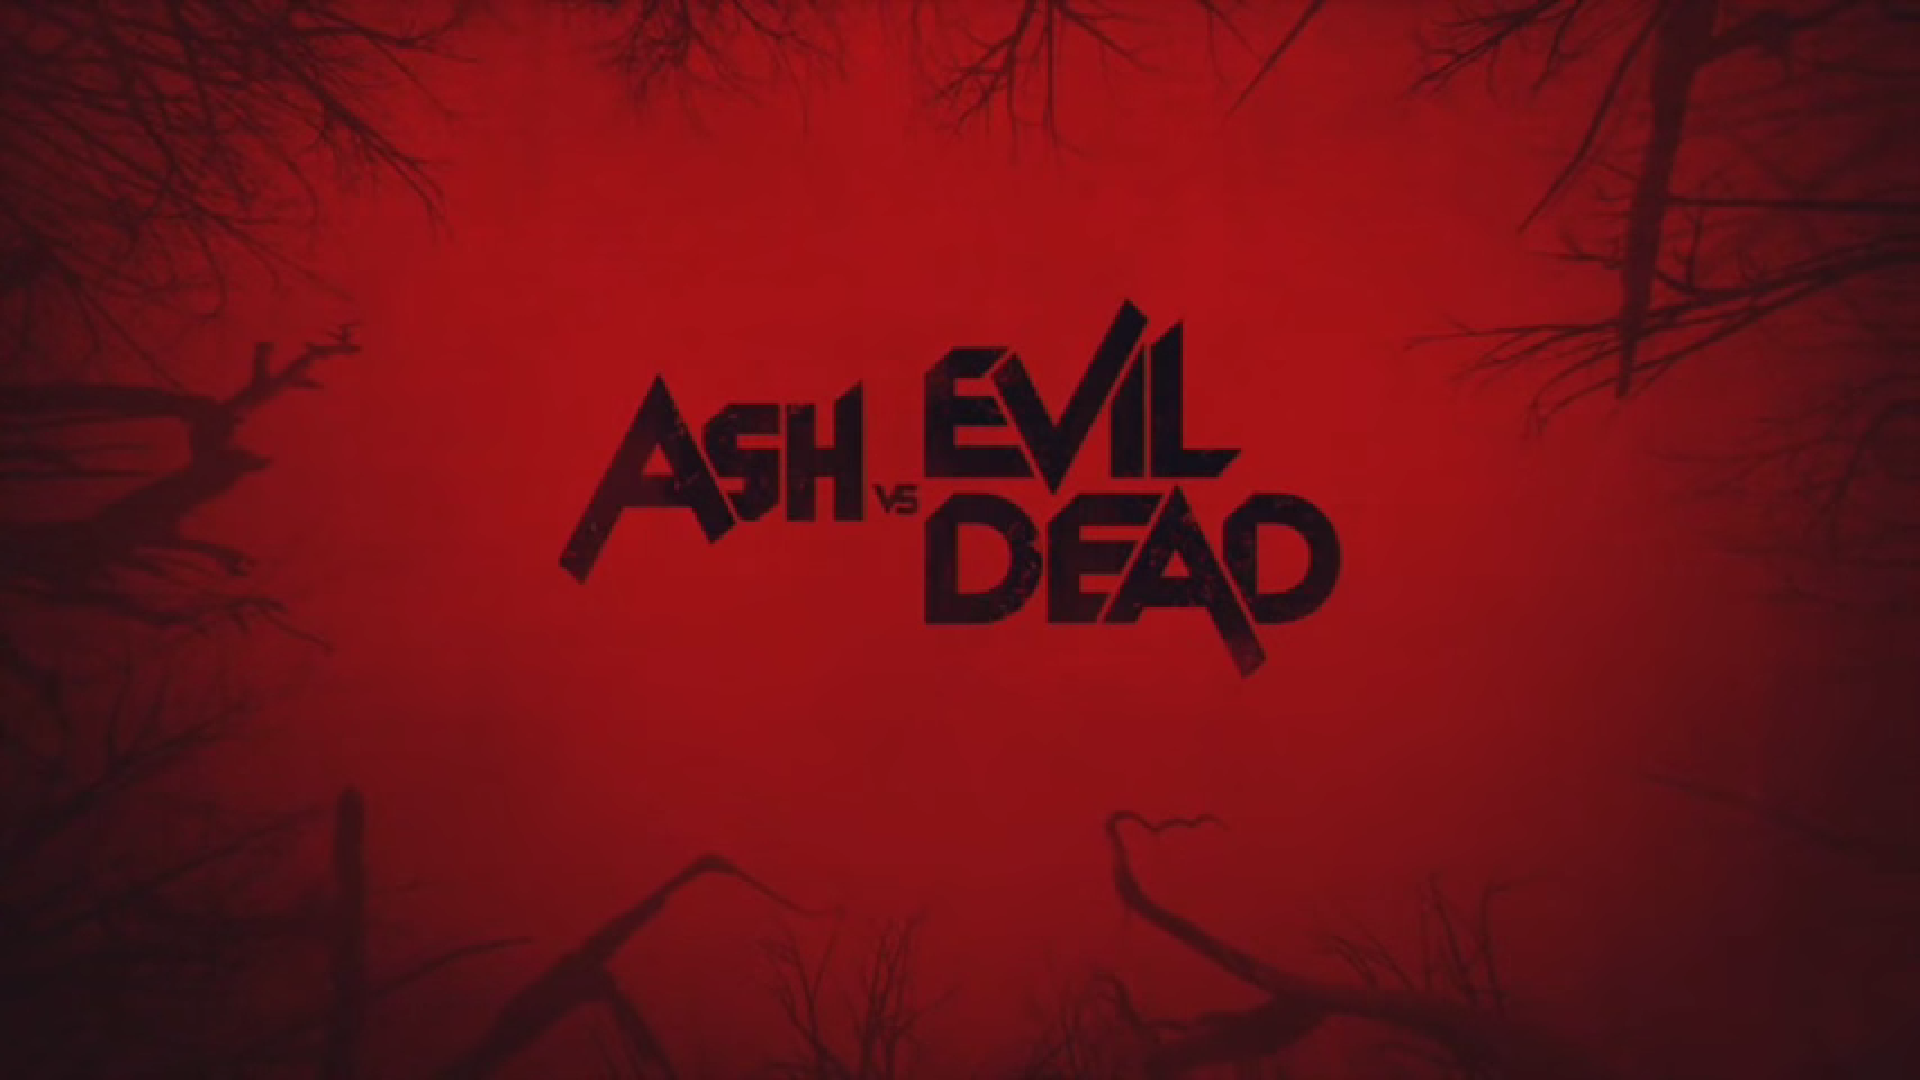 First 4 Minuites of Ash VS Evil Dead - The Ghic News